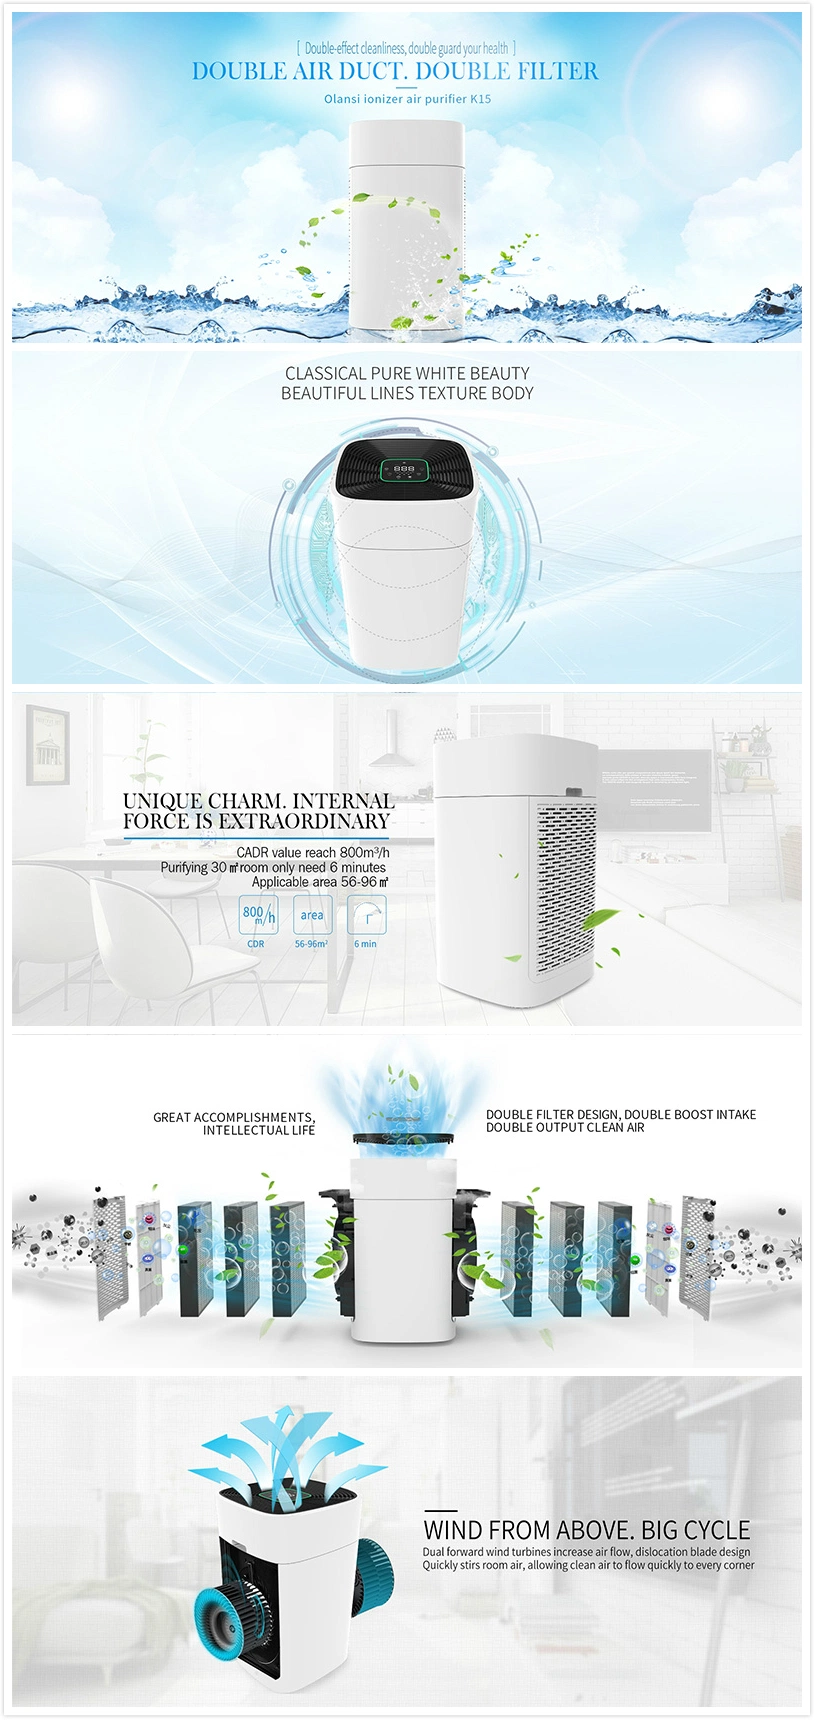 Housing Electronic Air Purifier Natural Air Cleaner for Room /Desktop